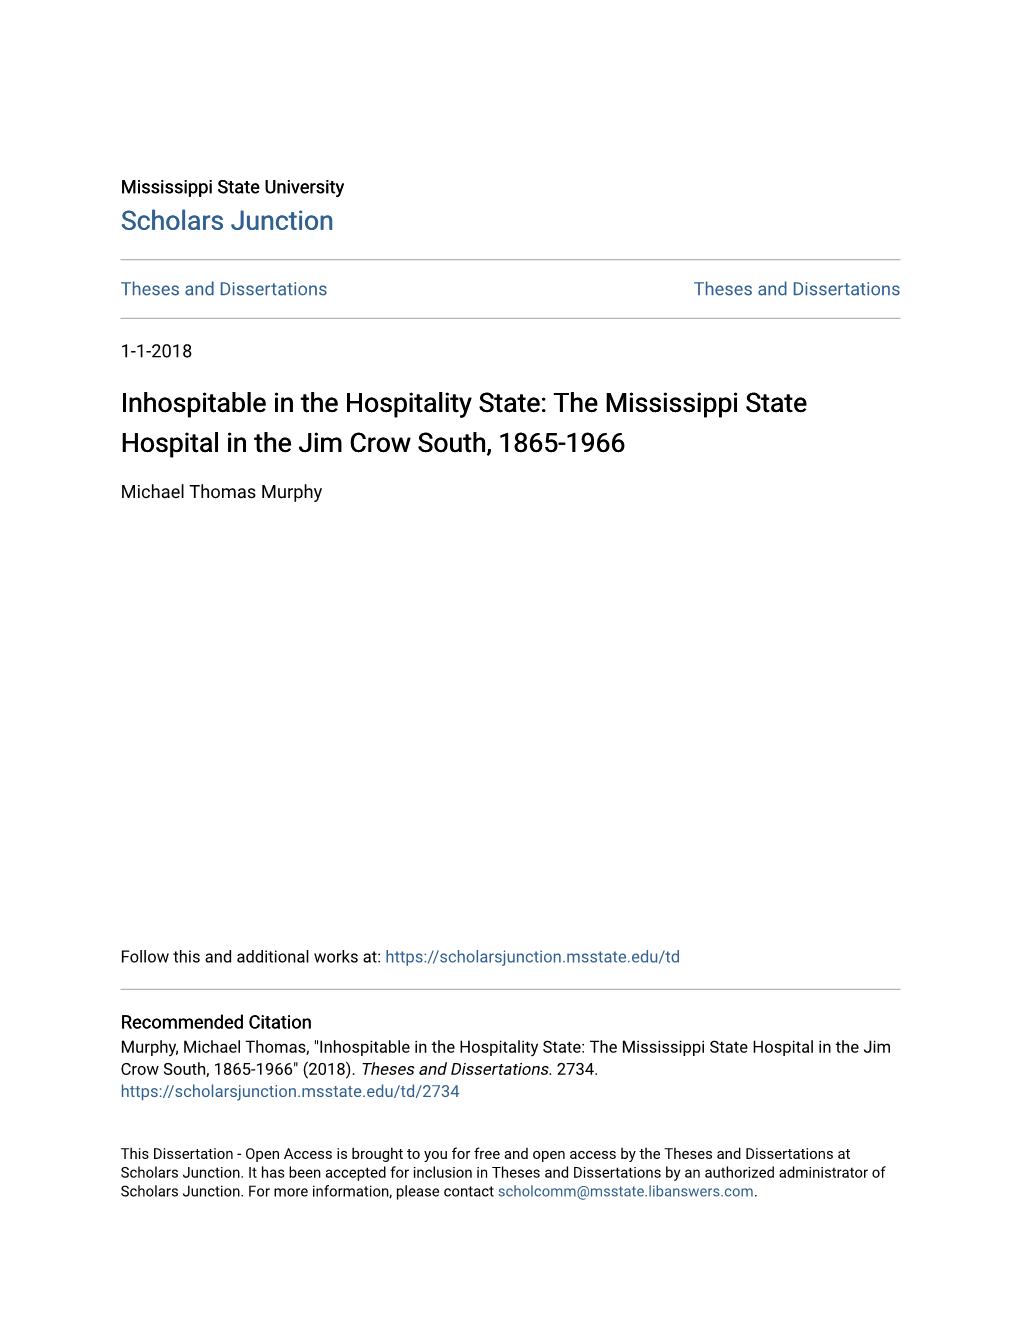 The Mississippi State Hospital in the Jim Crow South, 1865-1966